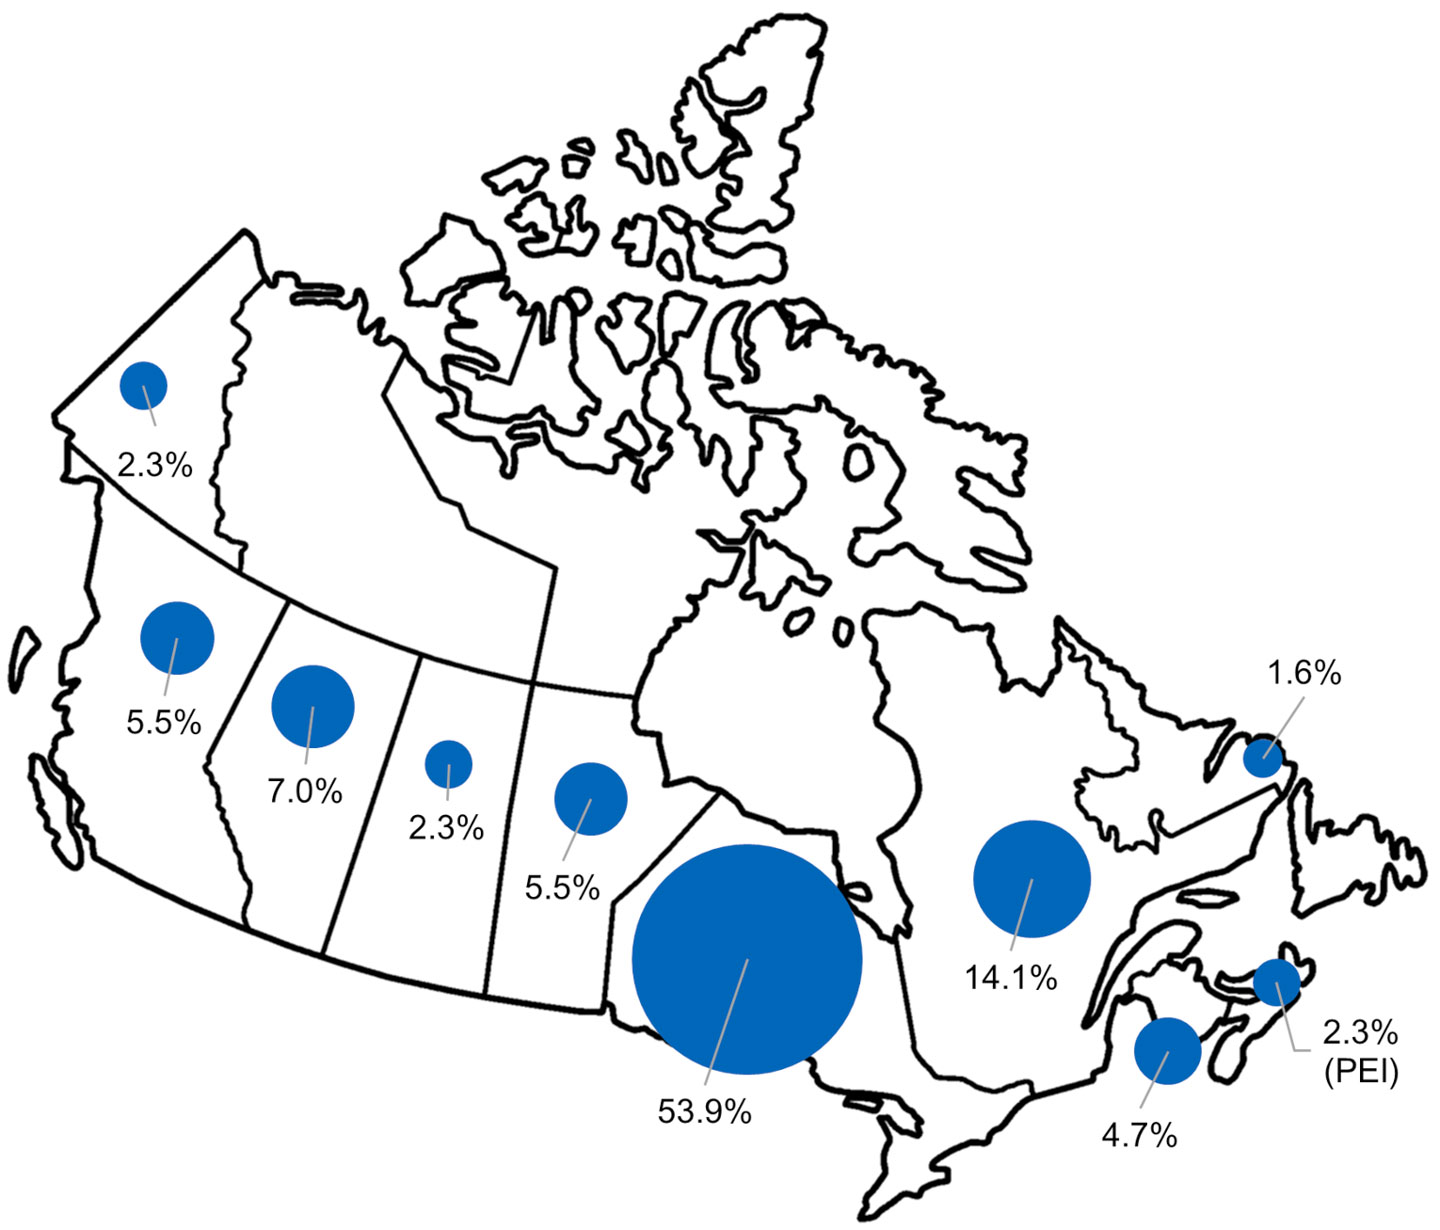 Bubble map of Canada showing the proportion of survey respondents from each province and territory. The majority of respondents were from Ontario and Quebec, although almost all jurisdictions had some level of representation.